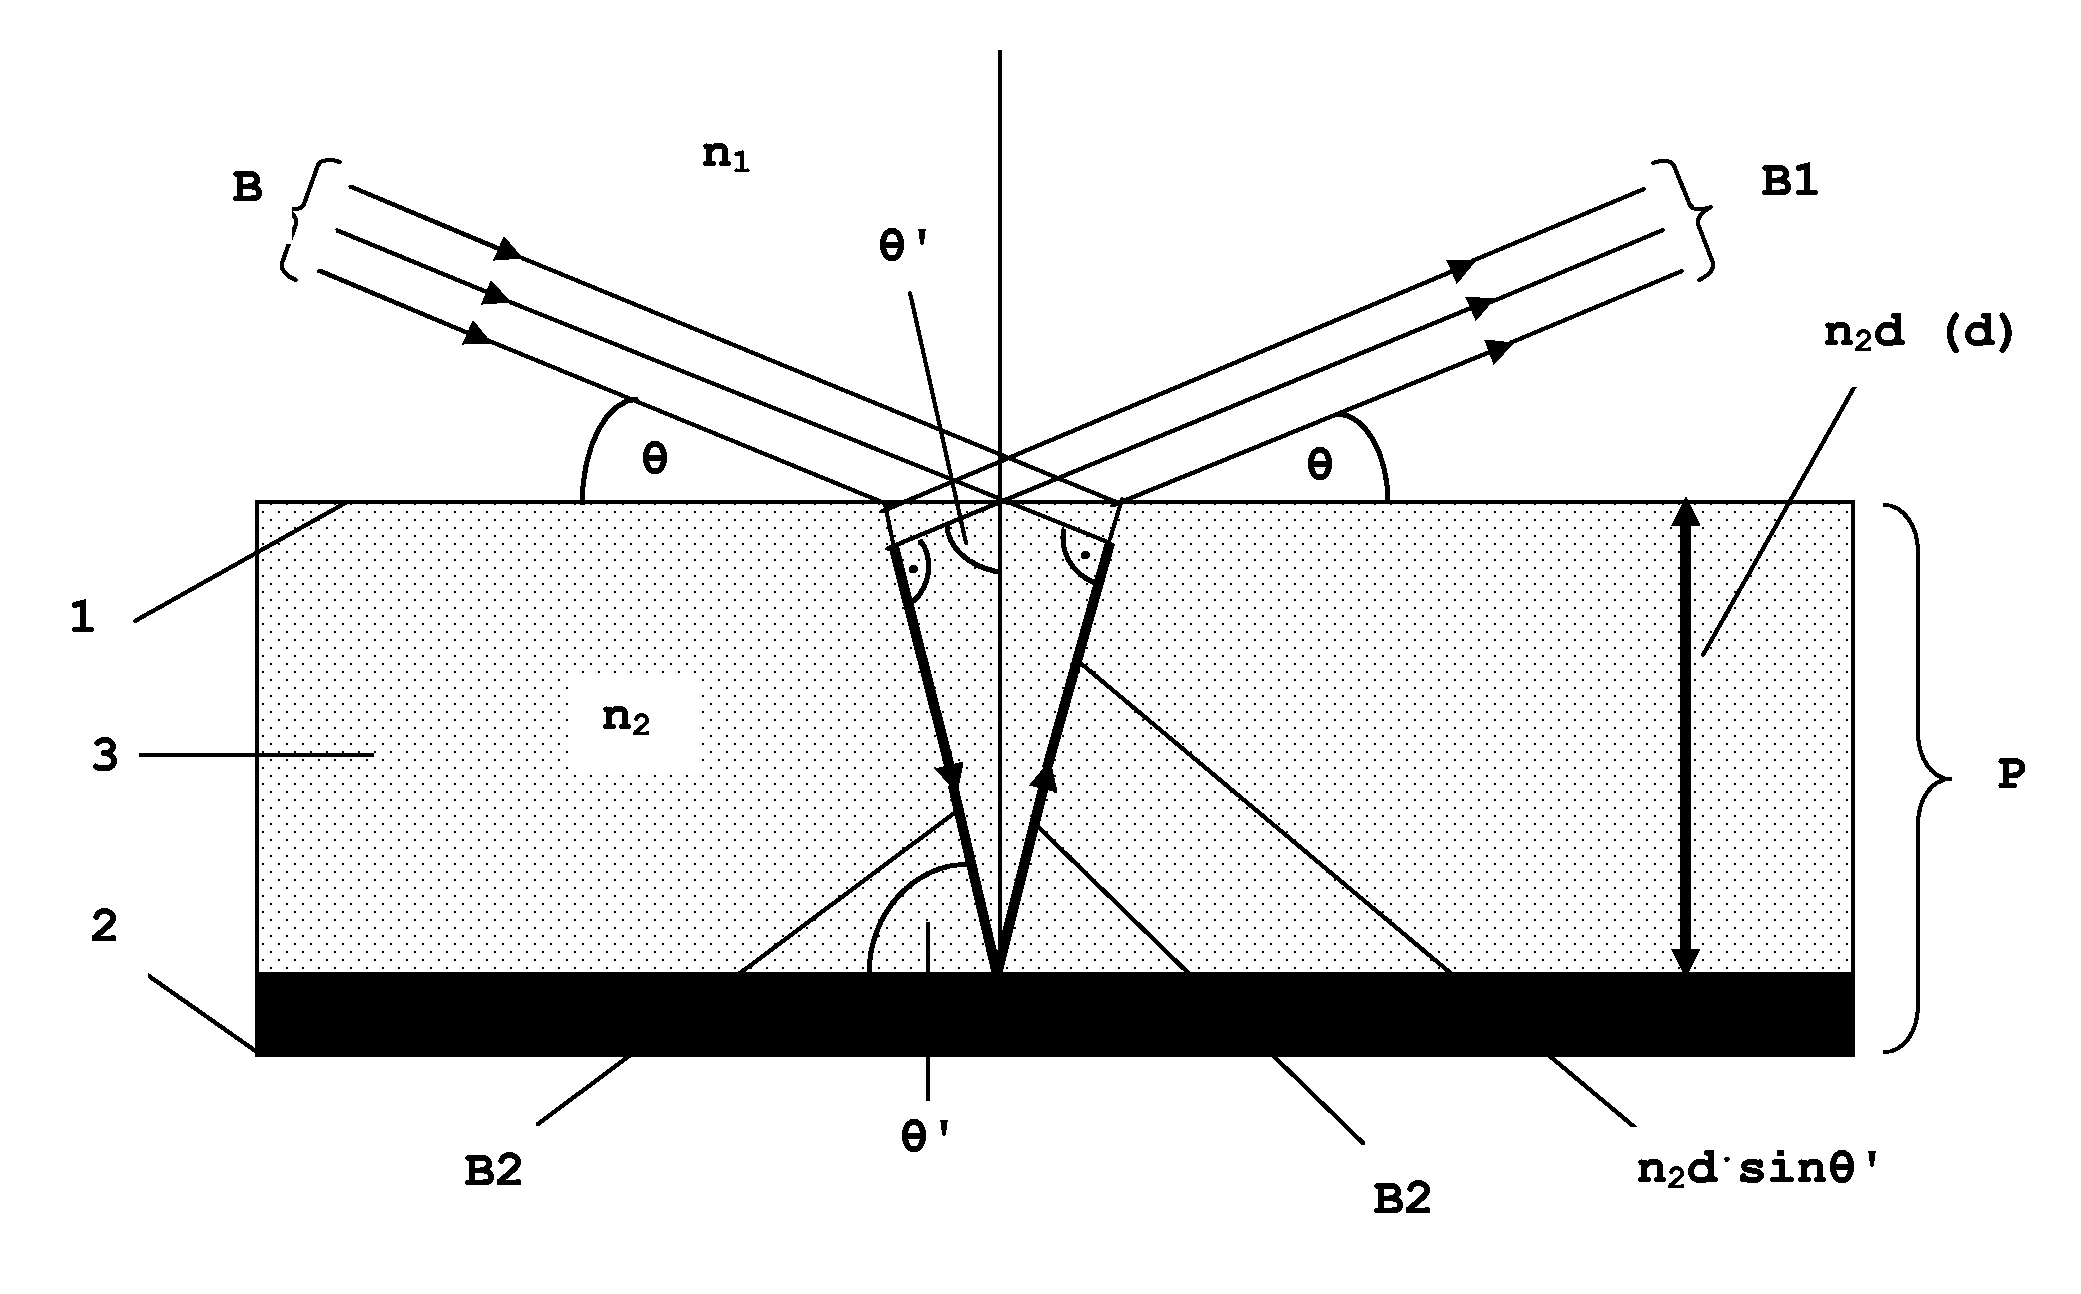 Black-to-color shifting security element